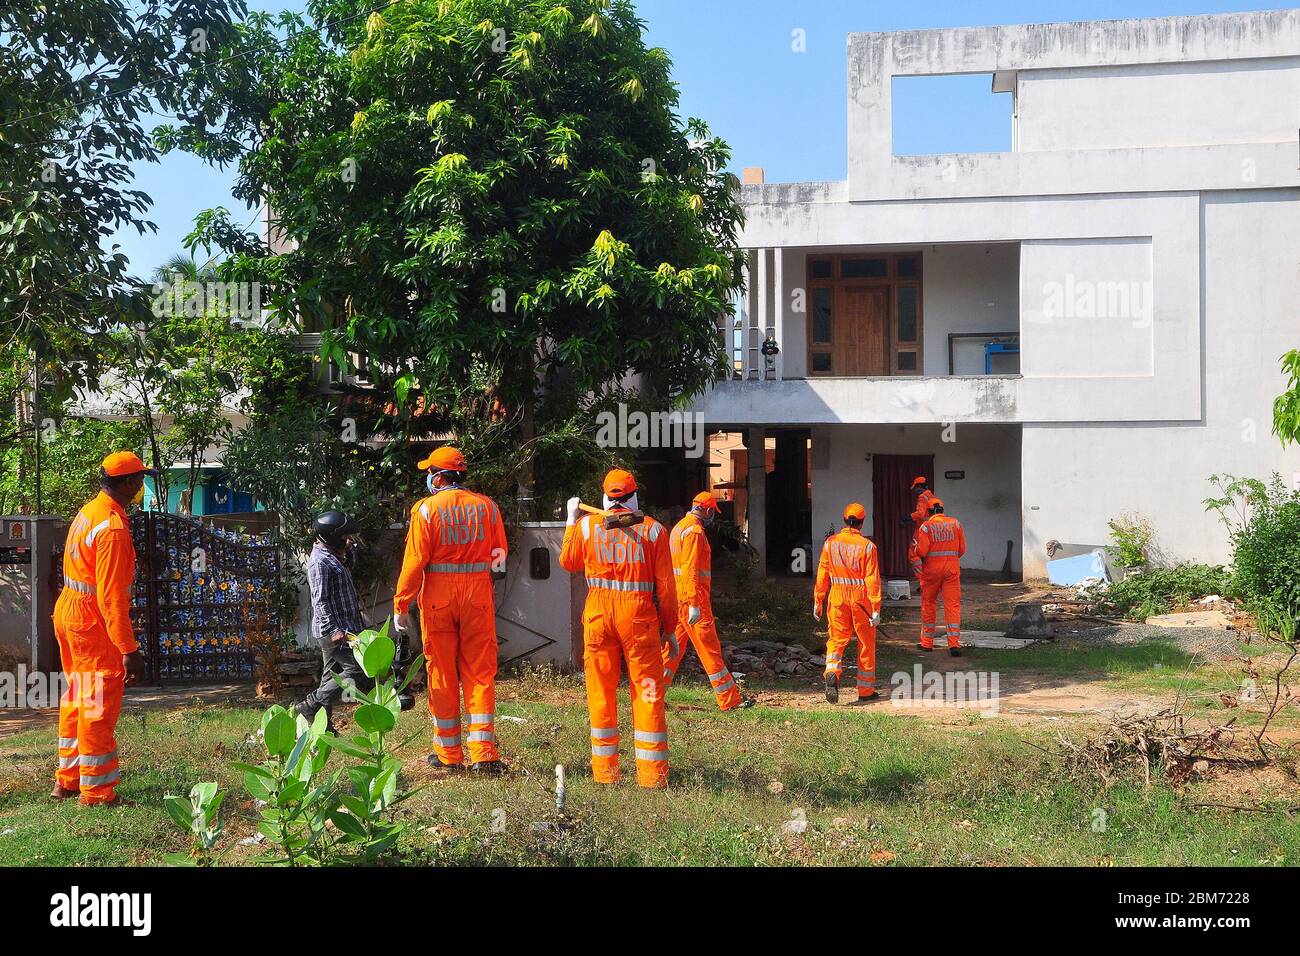 Andhra Pradesh, India. 7th May, 2020. Members of the National Disaster Response Force (NDRF) work after a gas leakage at the 'LG Polymers' chemical plant in the Vishakhapatnam district of Andhra Pradesh, India, May 7, 2020. The death toll in Thursday's gas leak incident in India's southern state Andhra Pradesh has risen to 11, confirmed Director General of the National Disaster Response Force (NDRF) S.N. Pradhan while addressing media persons in Delhi. Credit: Str/Xinhua/Alamy Live News Stock Photo